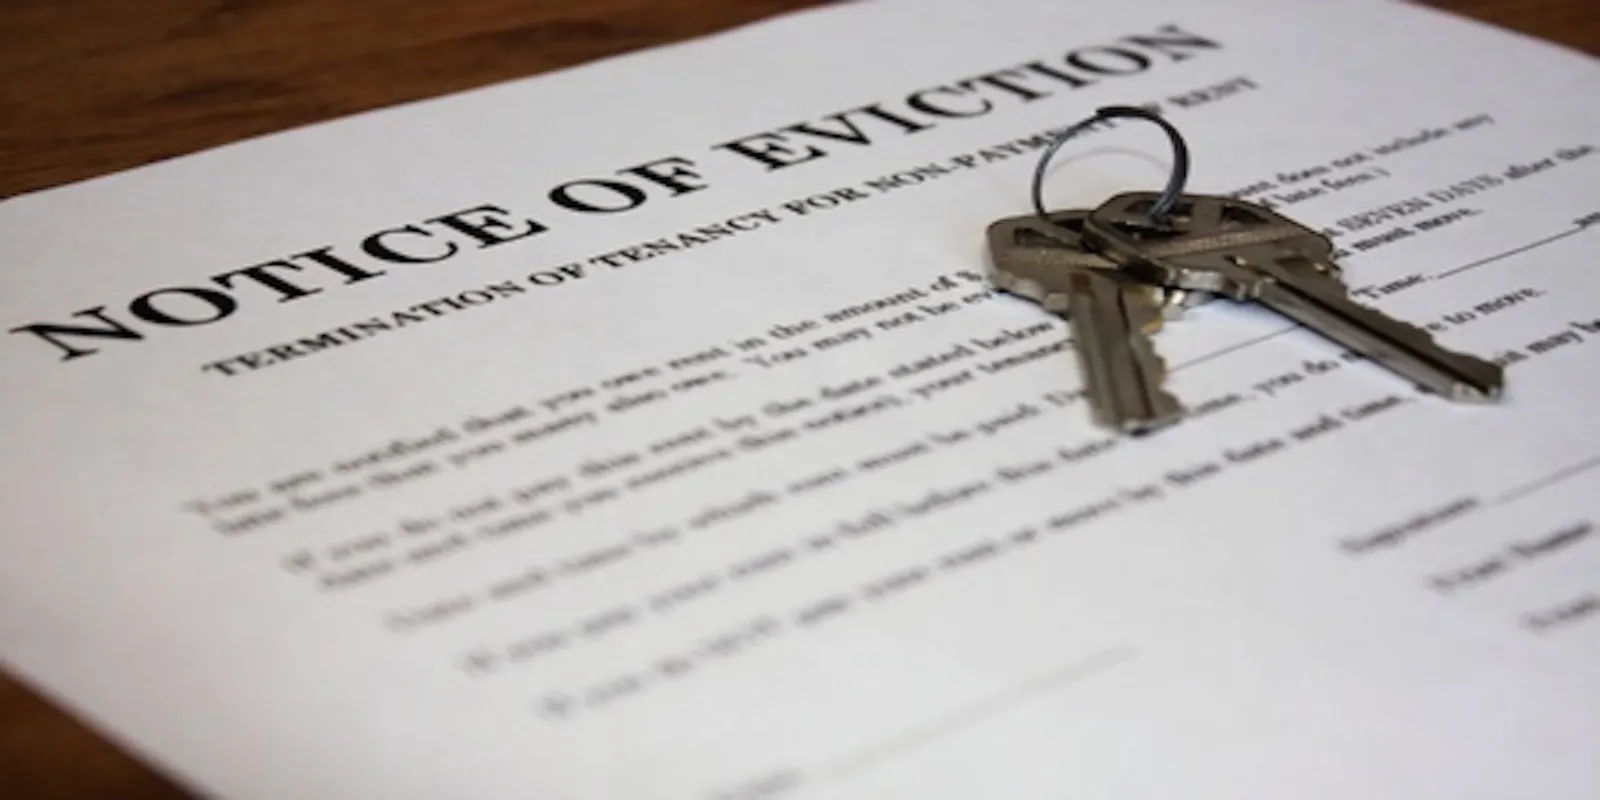 Can Administrator of Estate Evict Tenants: Know Your Rights and Limitations